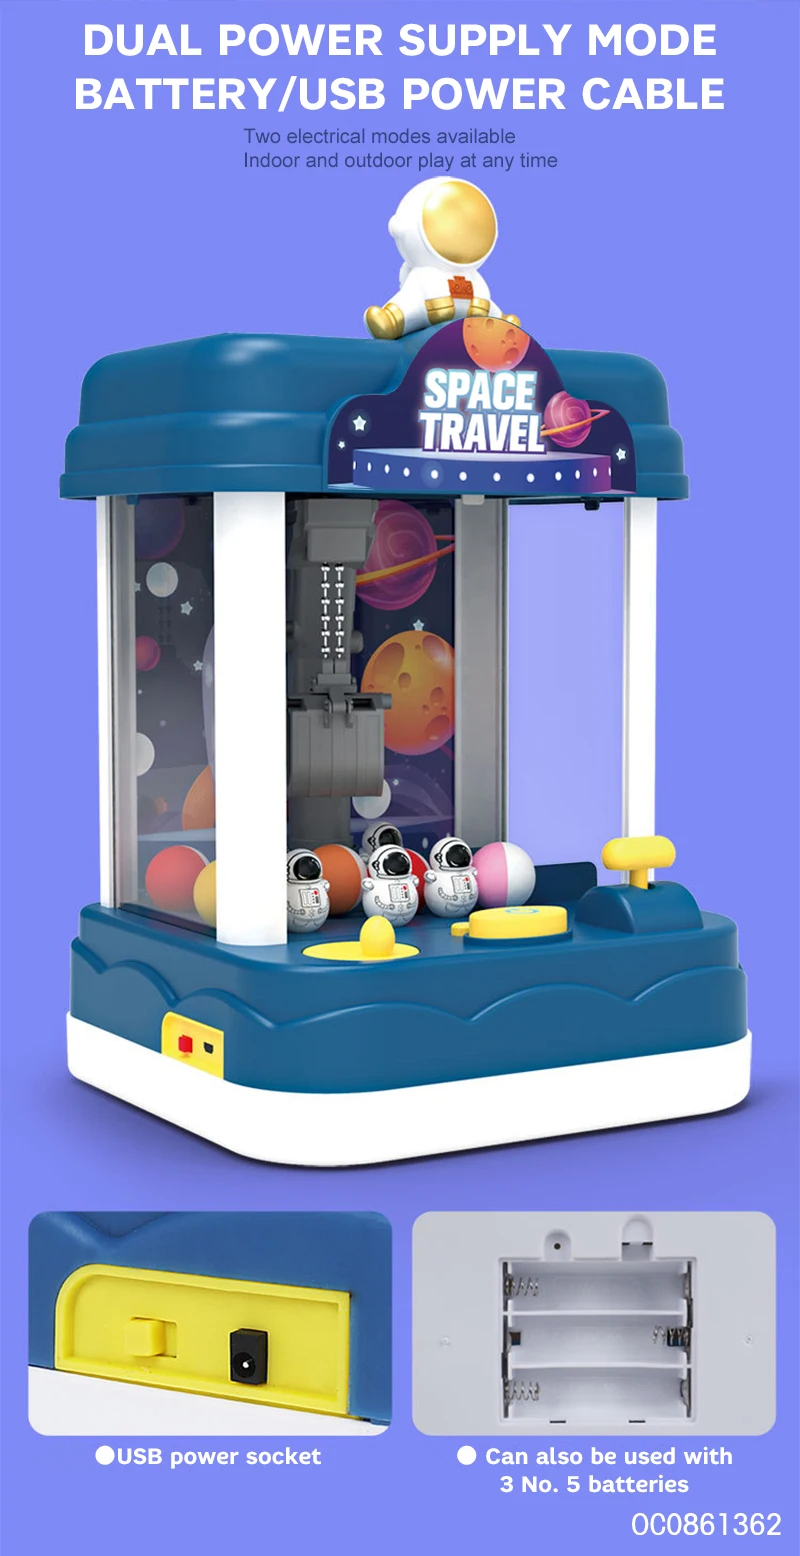 Space theme kids indoor games electronics mini grabbing doll machine toy for sale